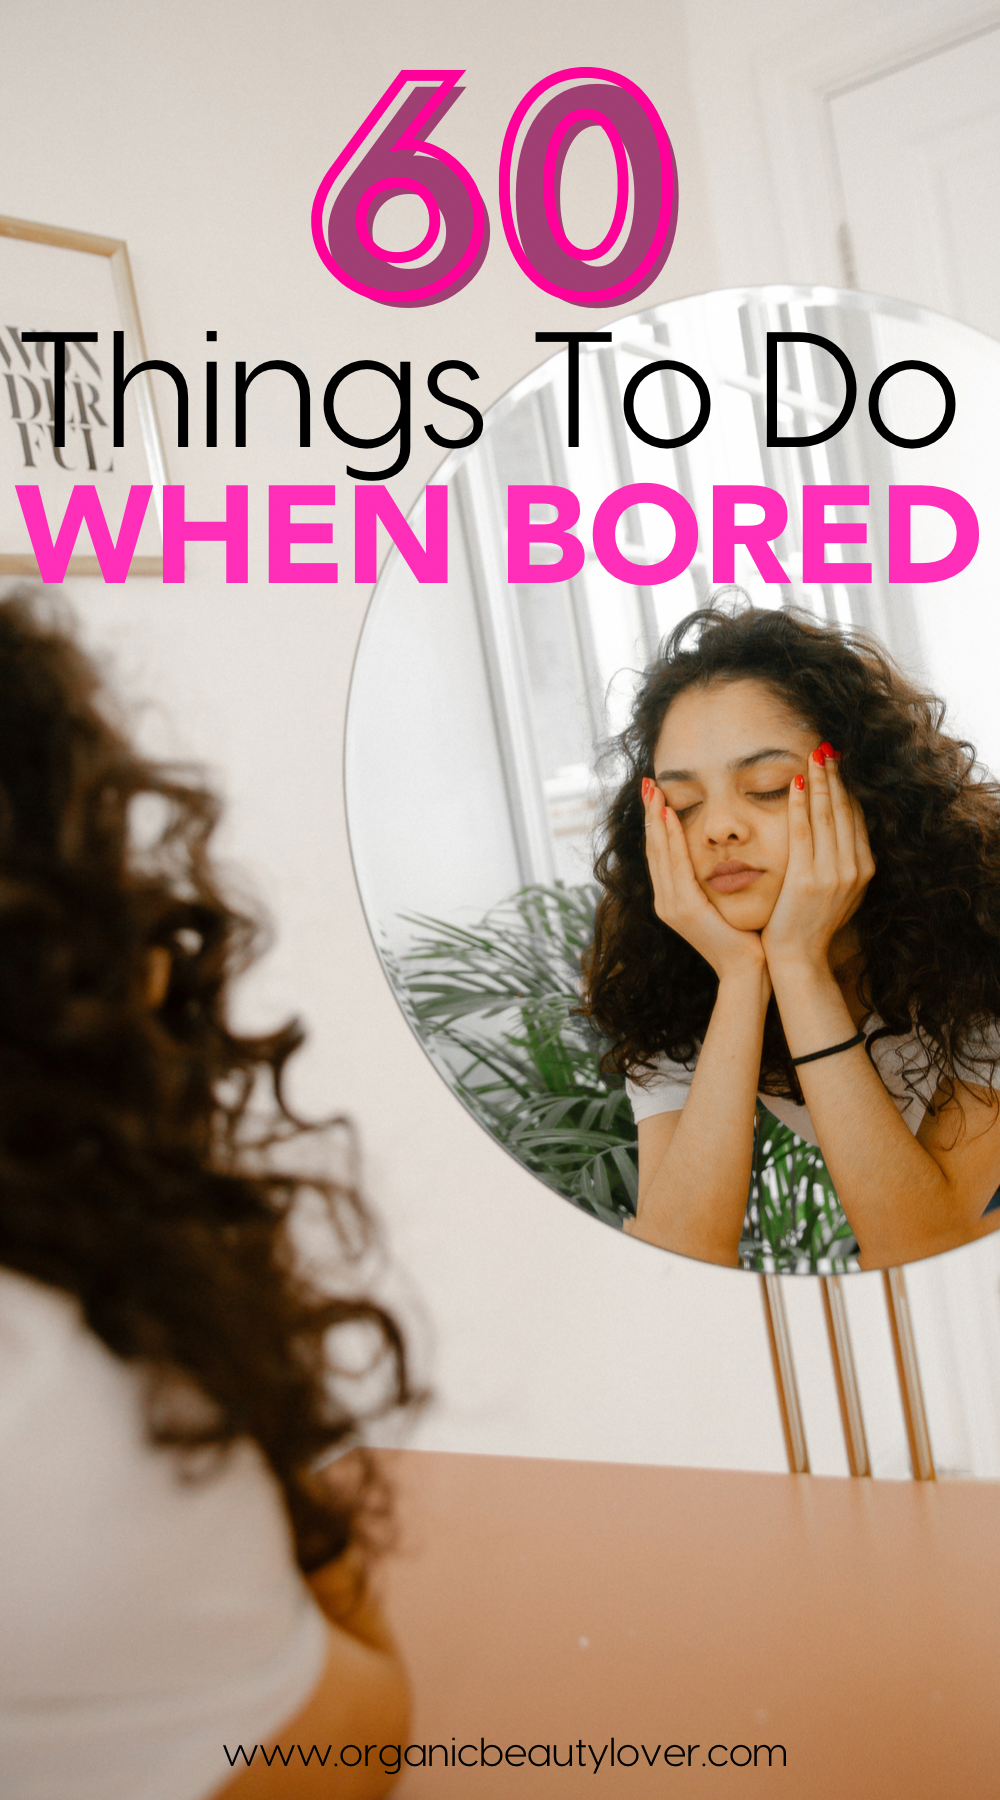 Things to do at night bored in your room